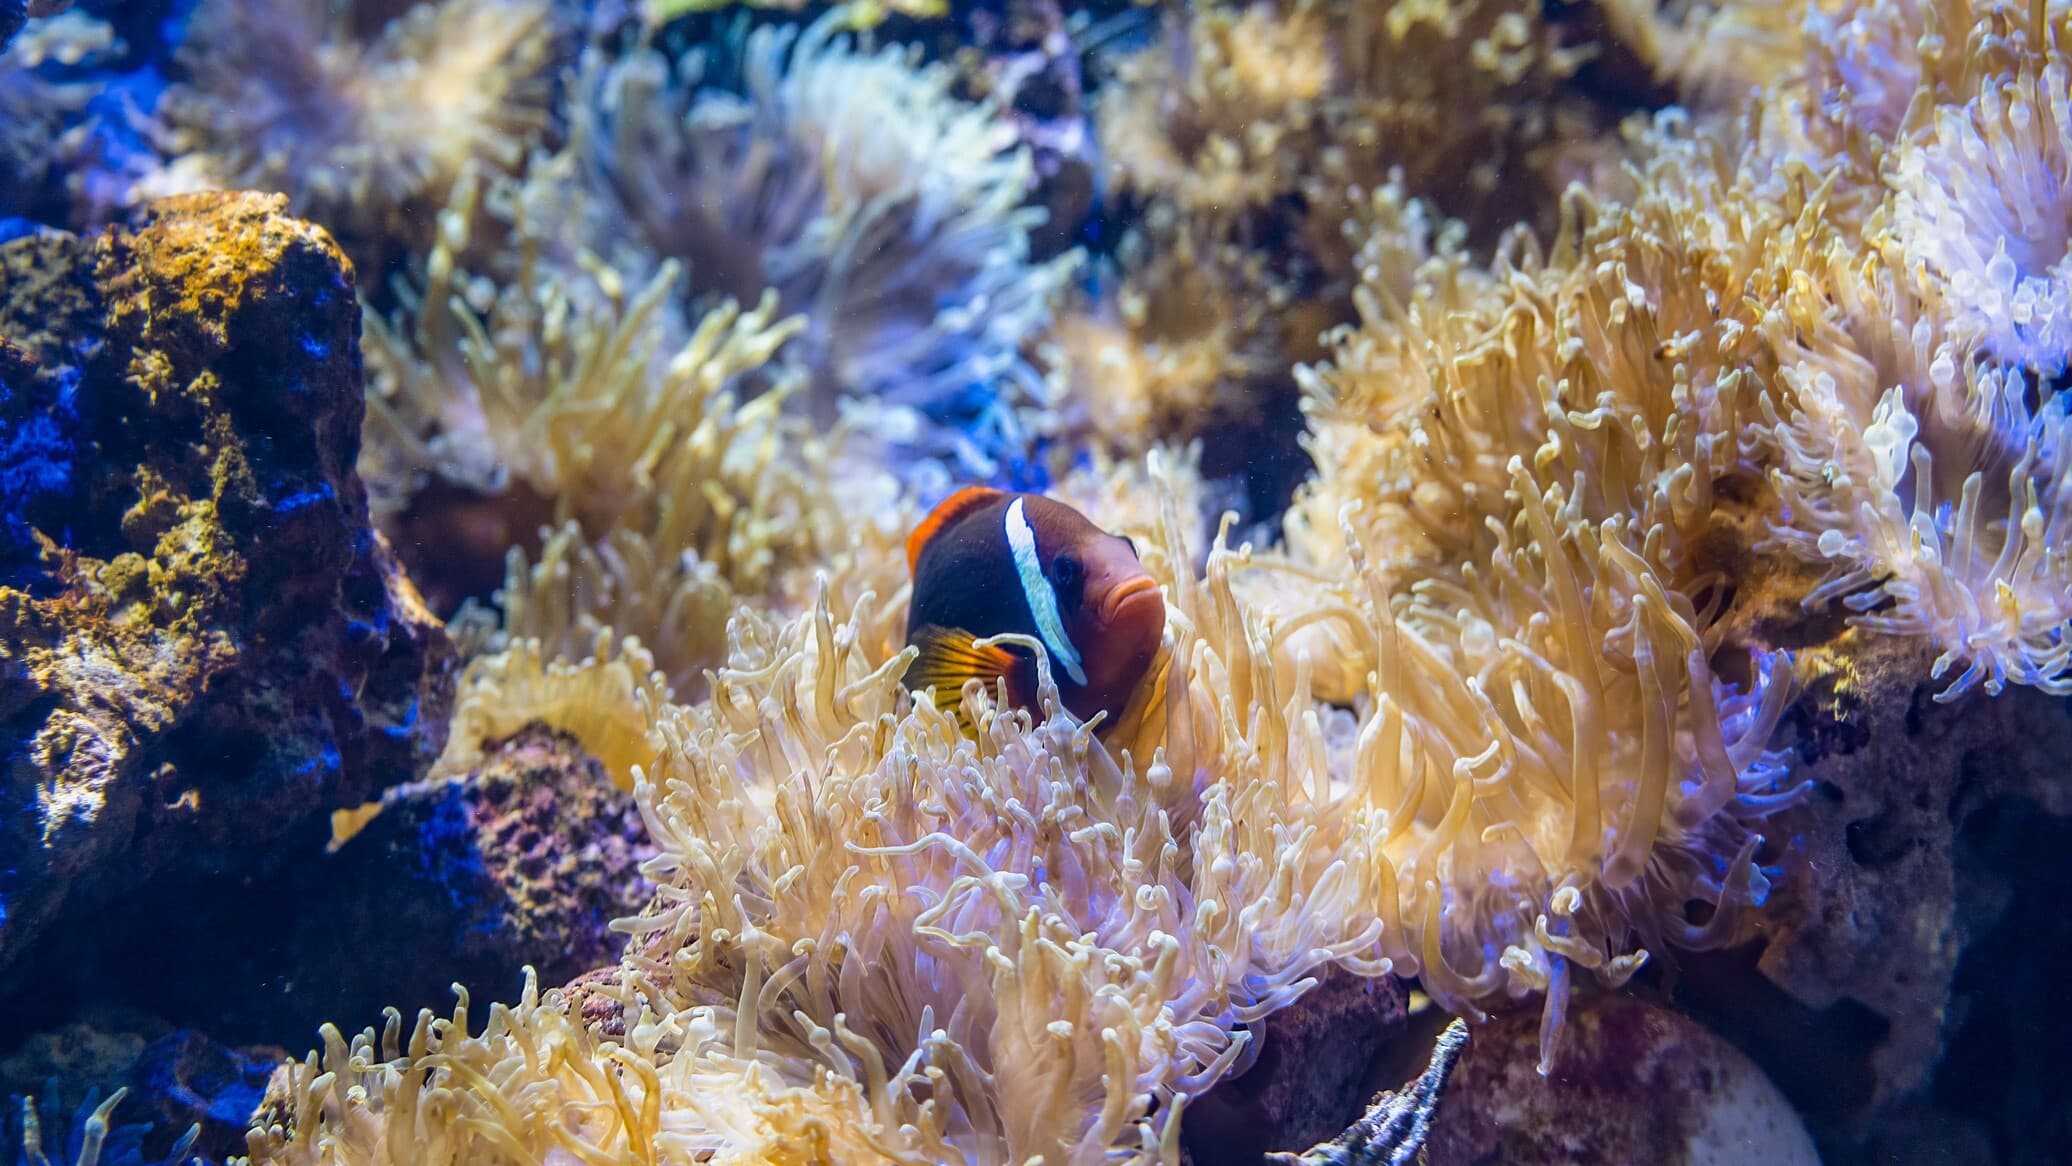 A tomato clownfish peeks up from its home among a reef full of bubble anemones